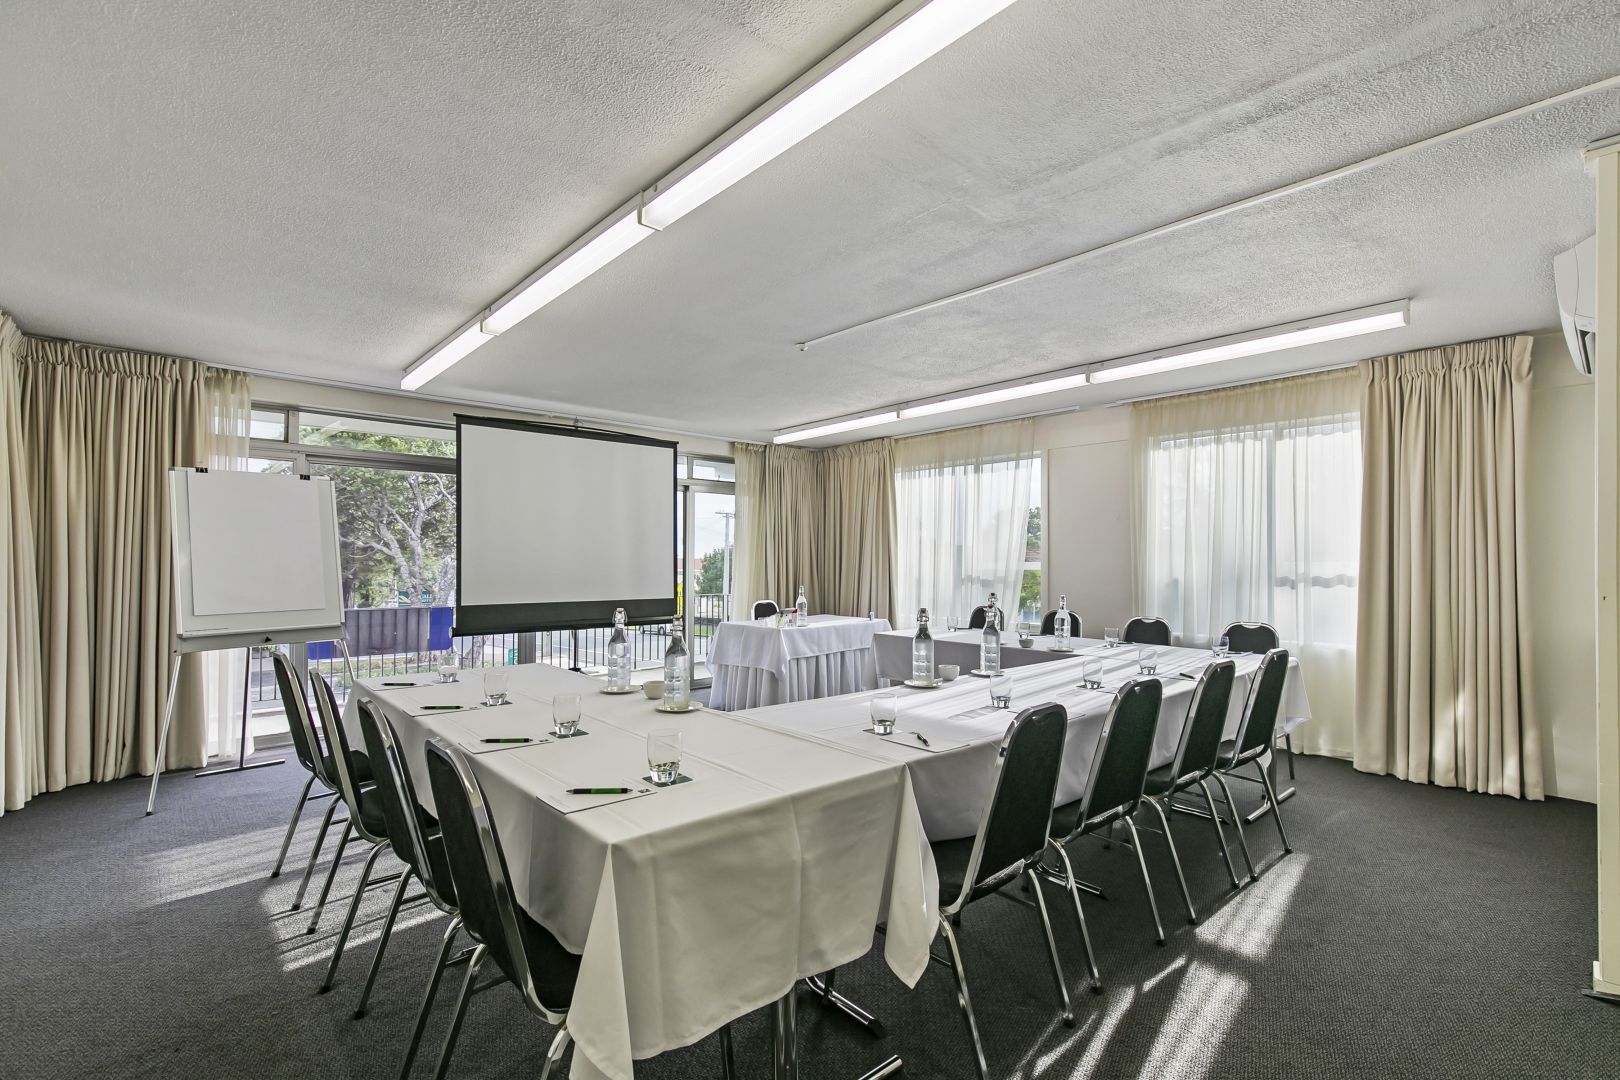 Gladstone Three Is The Ideal Meeting Room For Groups Of Up to 25 People